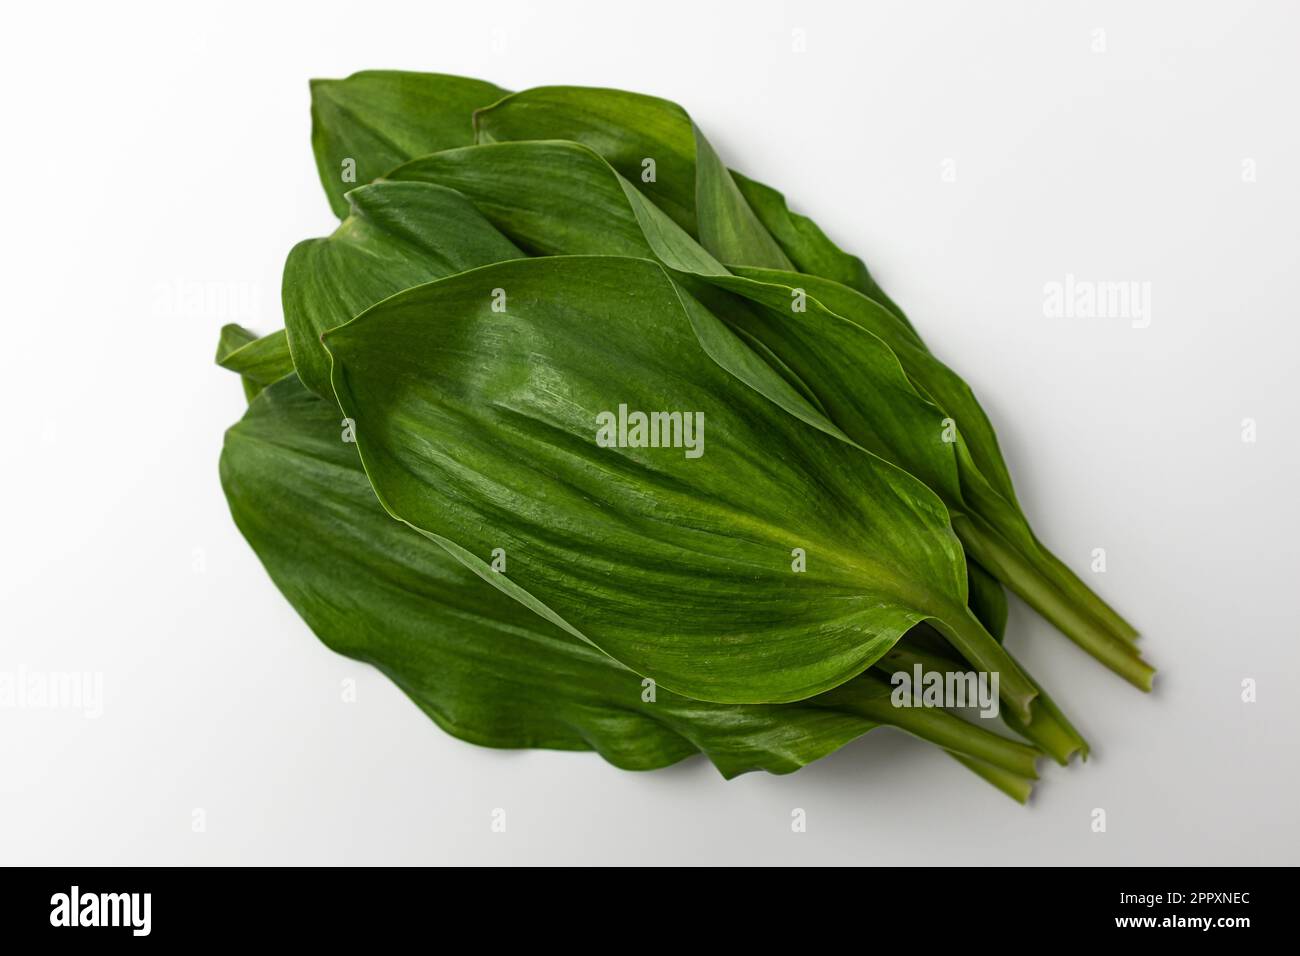 East Asian food culture. Thin, elongated, edible leaves. Edible plants with good chewing texture Stock Photo